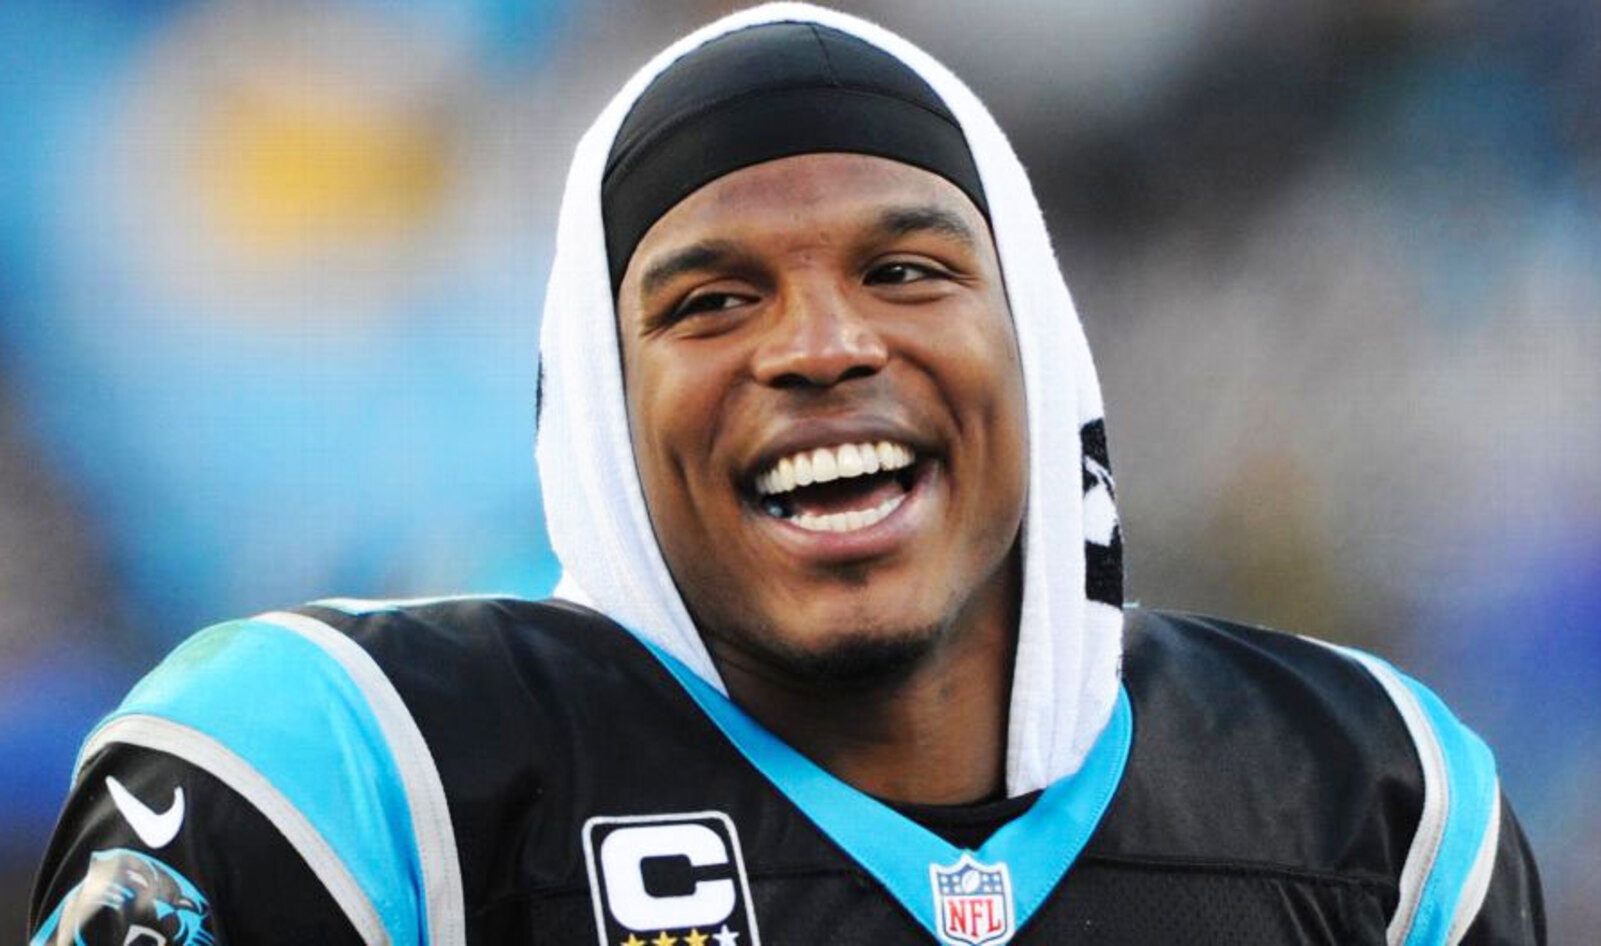 NFL Quarterback Cam Newton Returns to Football “Feeling Like a Rookie” After Going Vegan